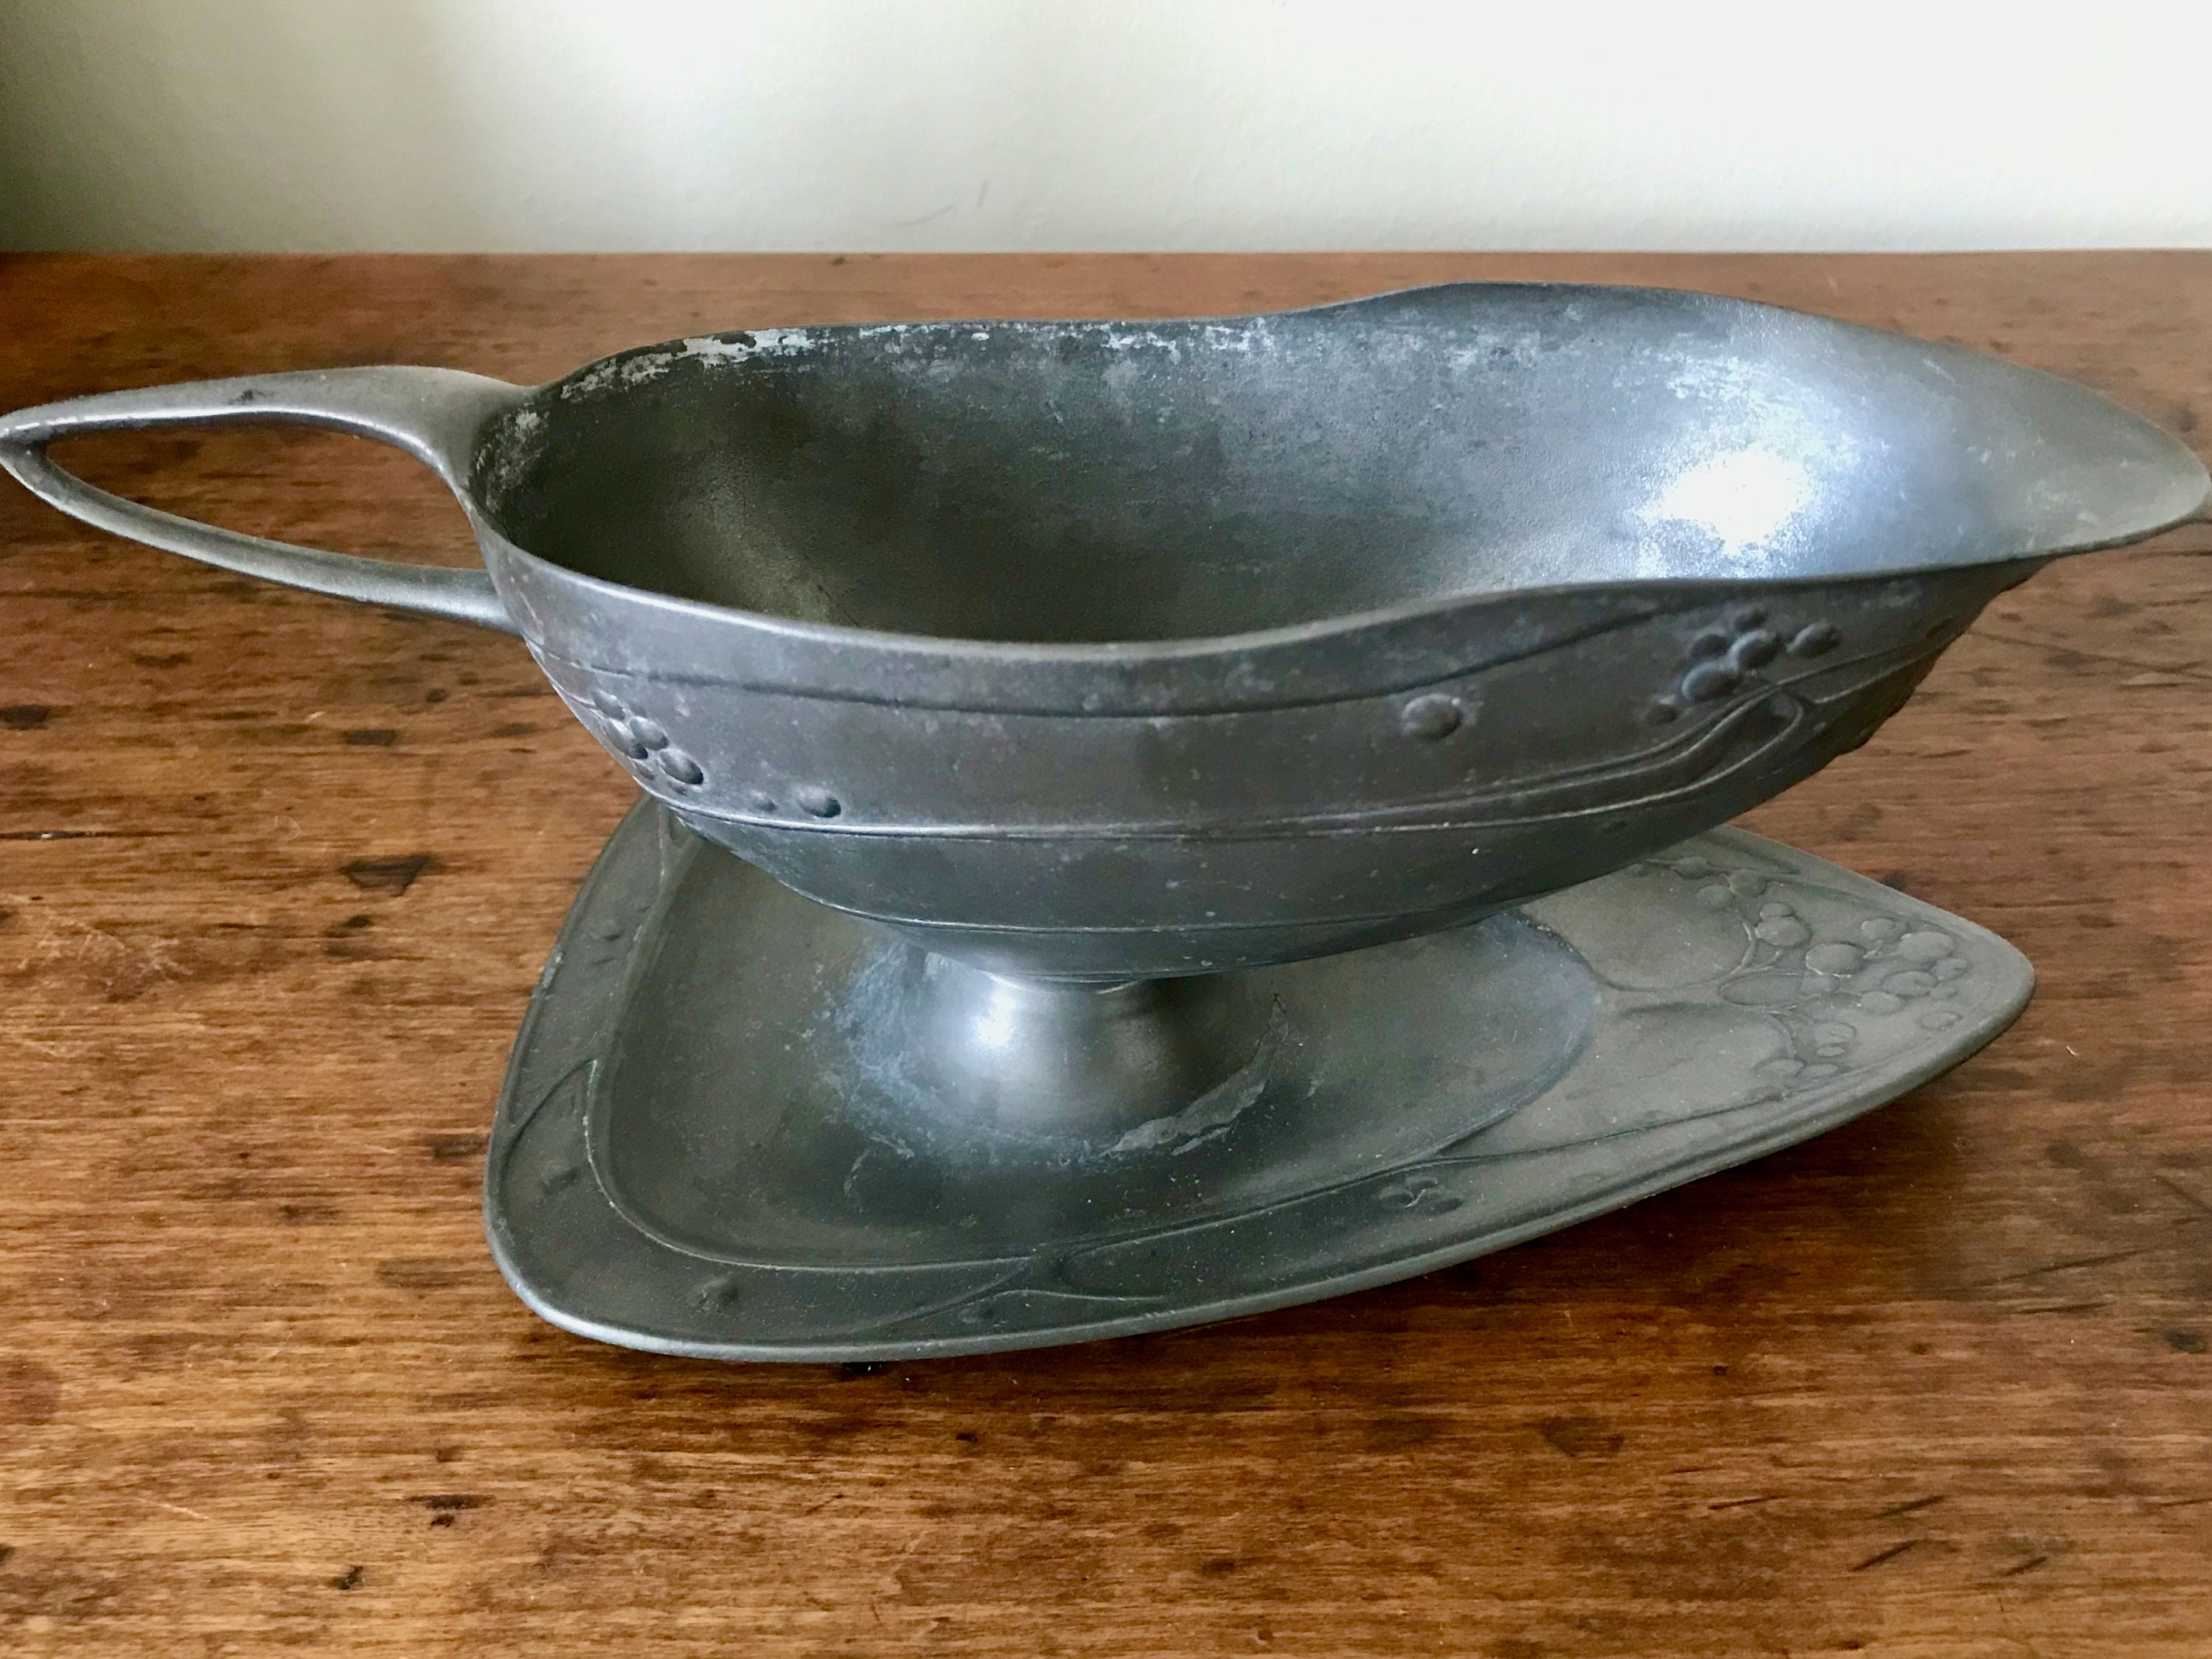 MATCH Pewter Gravy Boat, Made in Italy, Holds 8 Ounces, Handmade on Food52